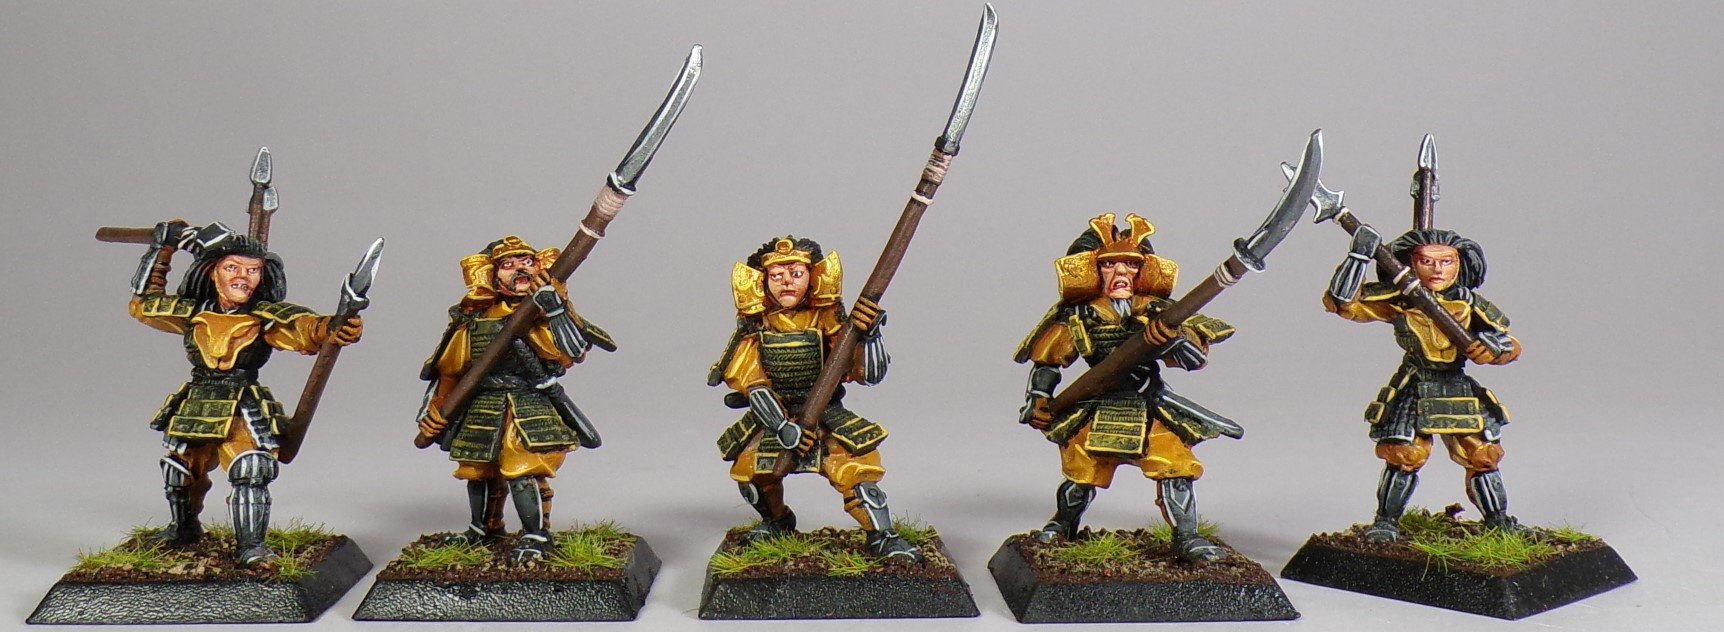 L5R Legend of the Five Rings Miniature Painting Service Paintedfigs (18).jpg